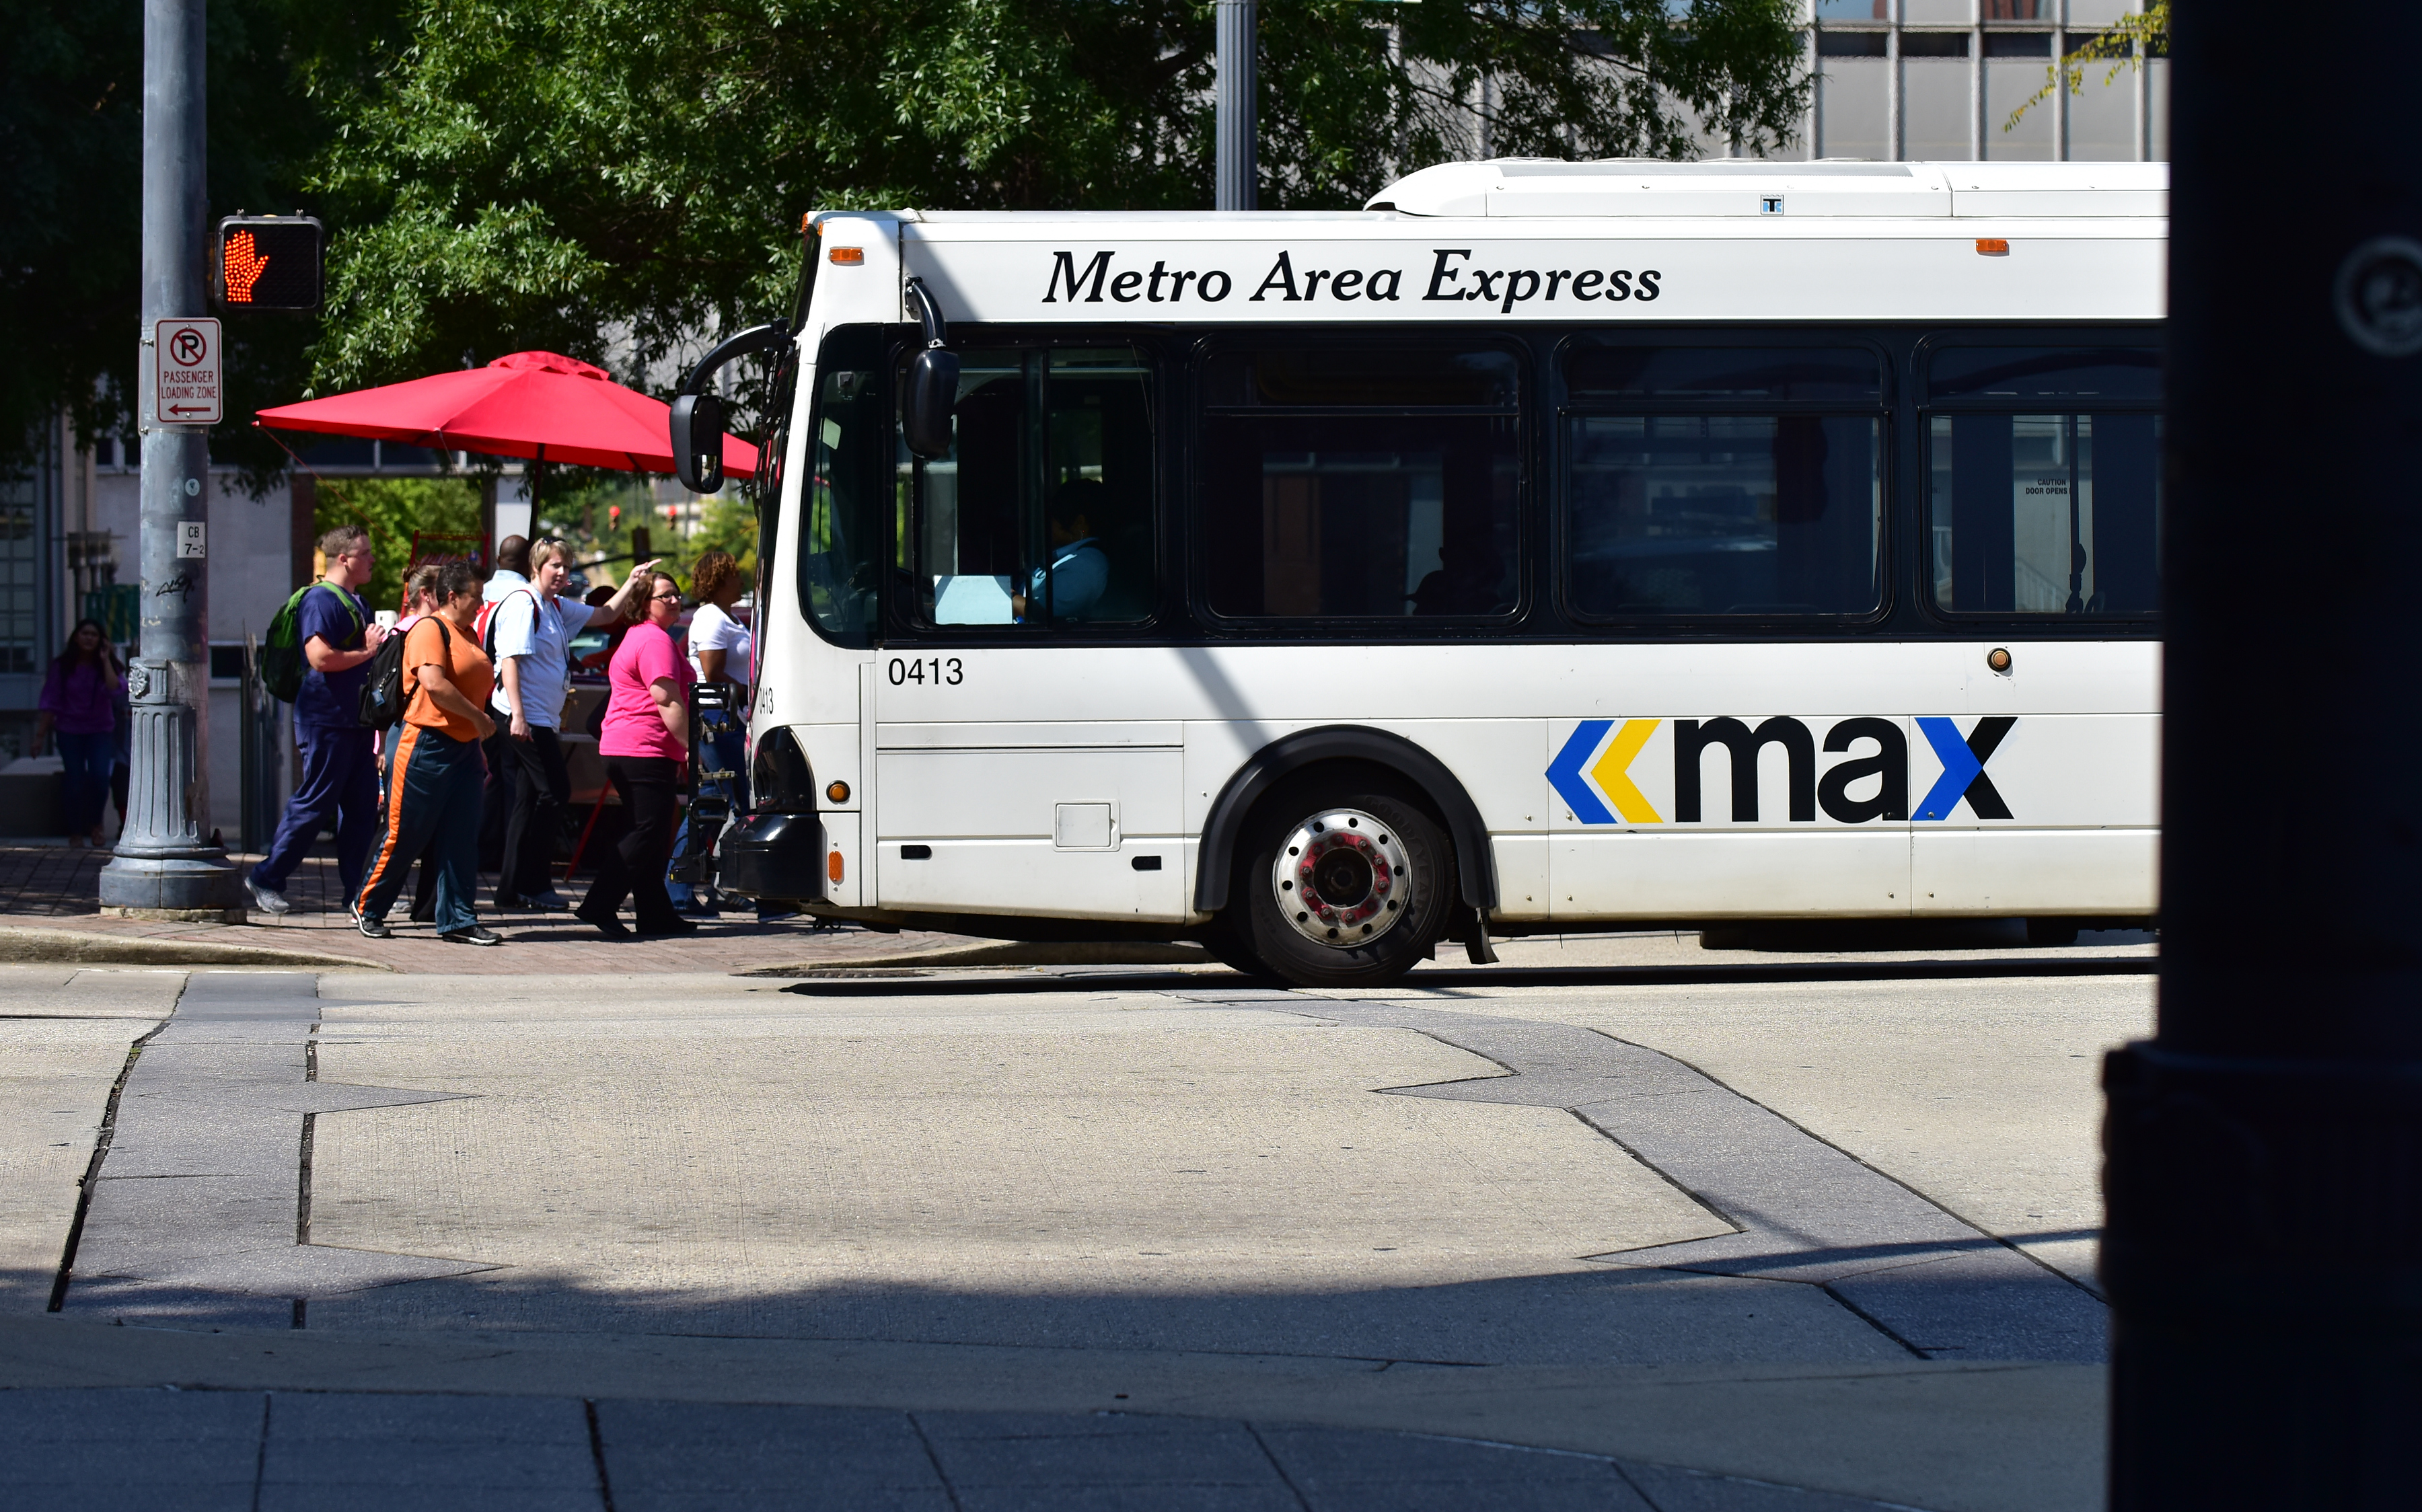 Birmingham Metro Area Express or MAX busses on routes throughout Birmingham. (Frank Couch, special to The Times)